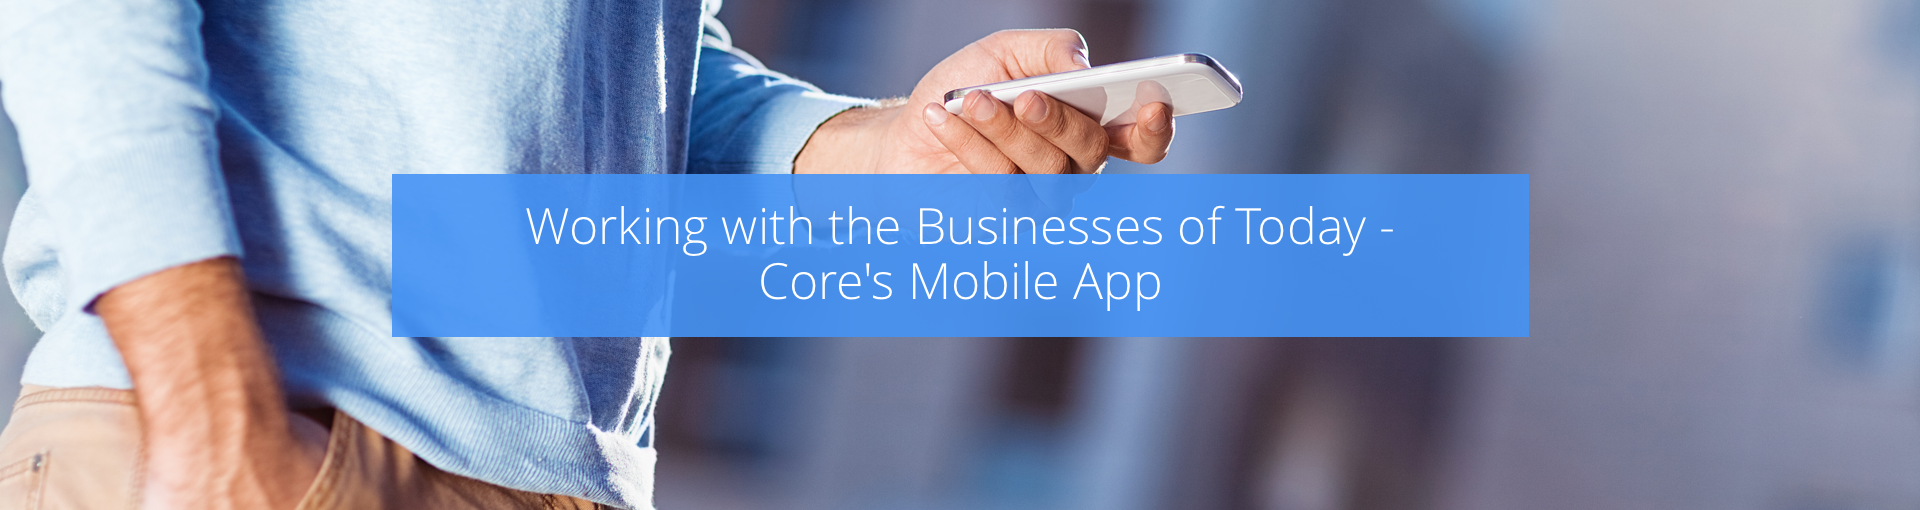 Working with the Businesses of Today - Core's Mobile App Featured Image